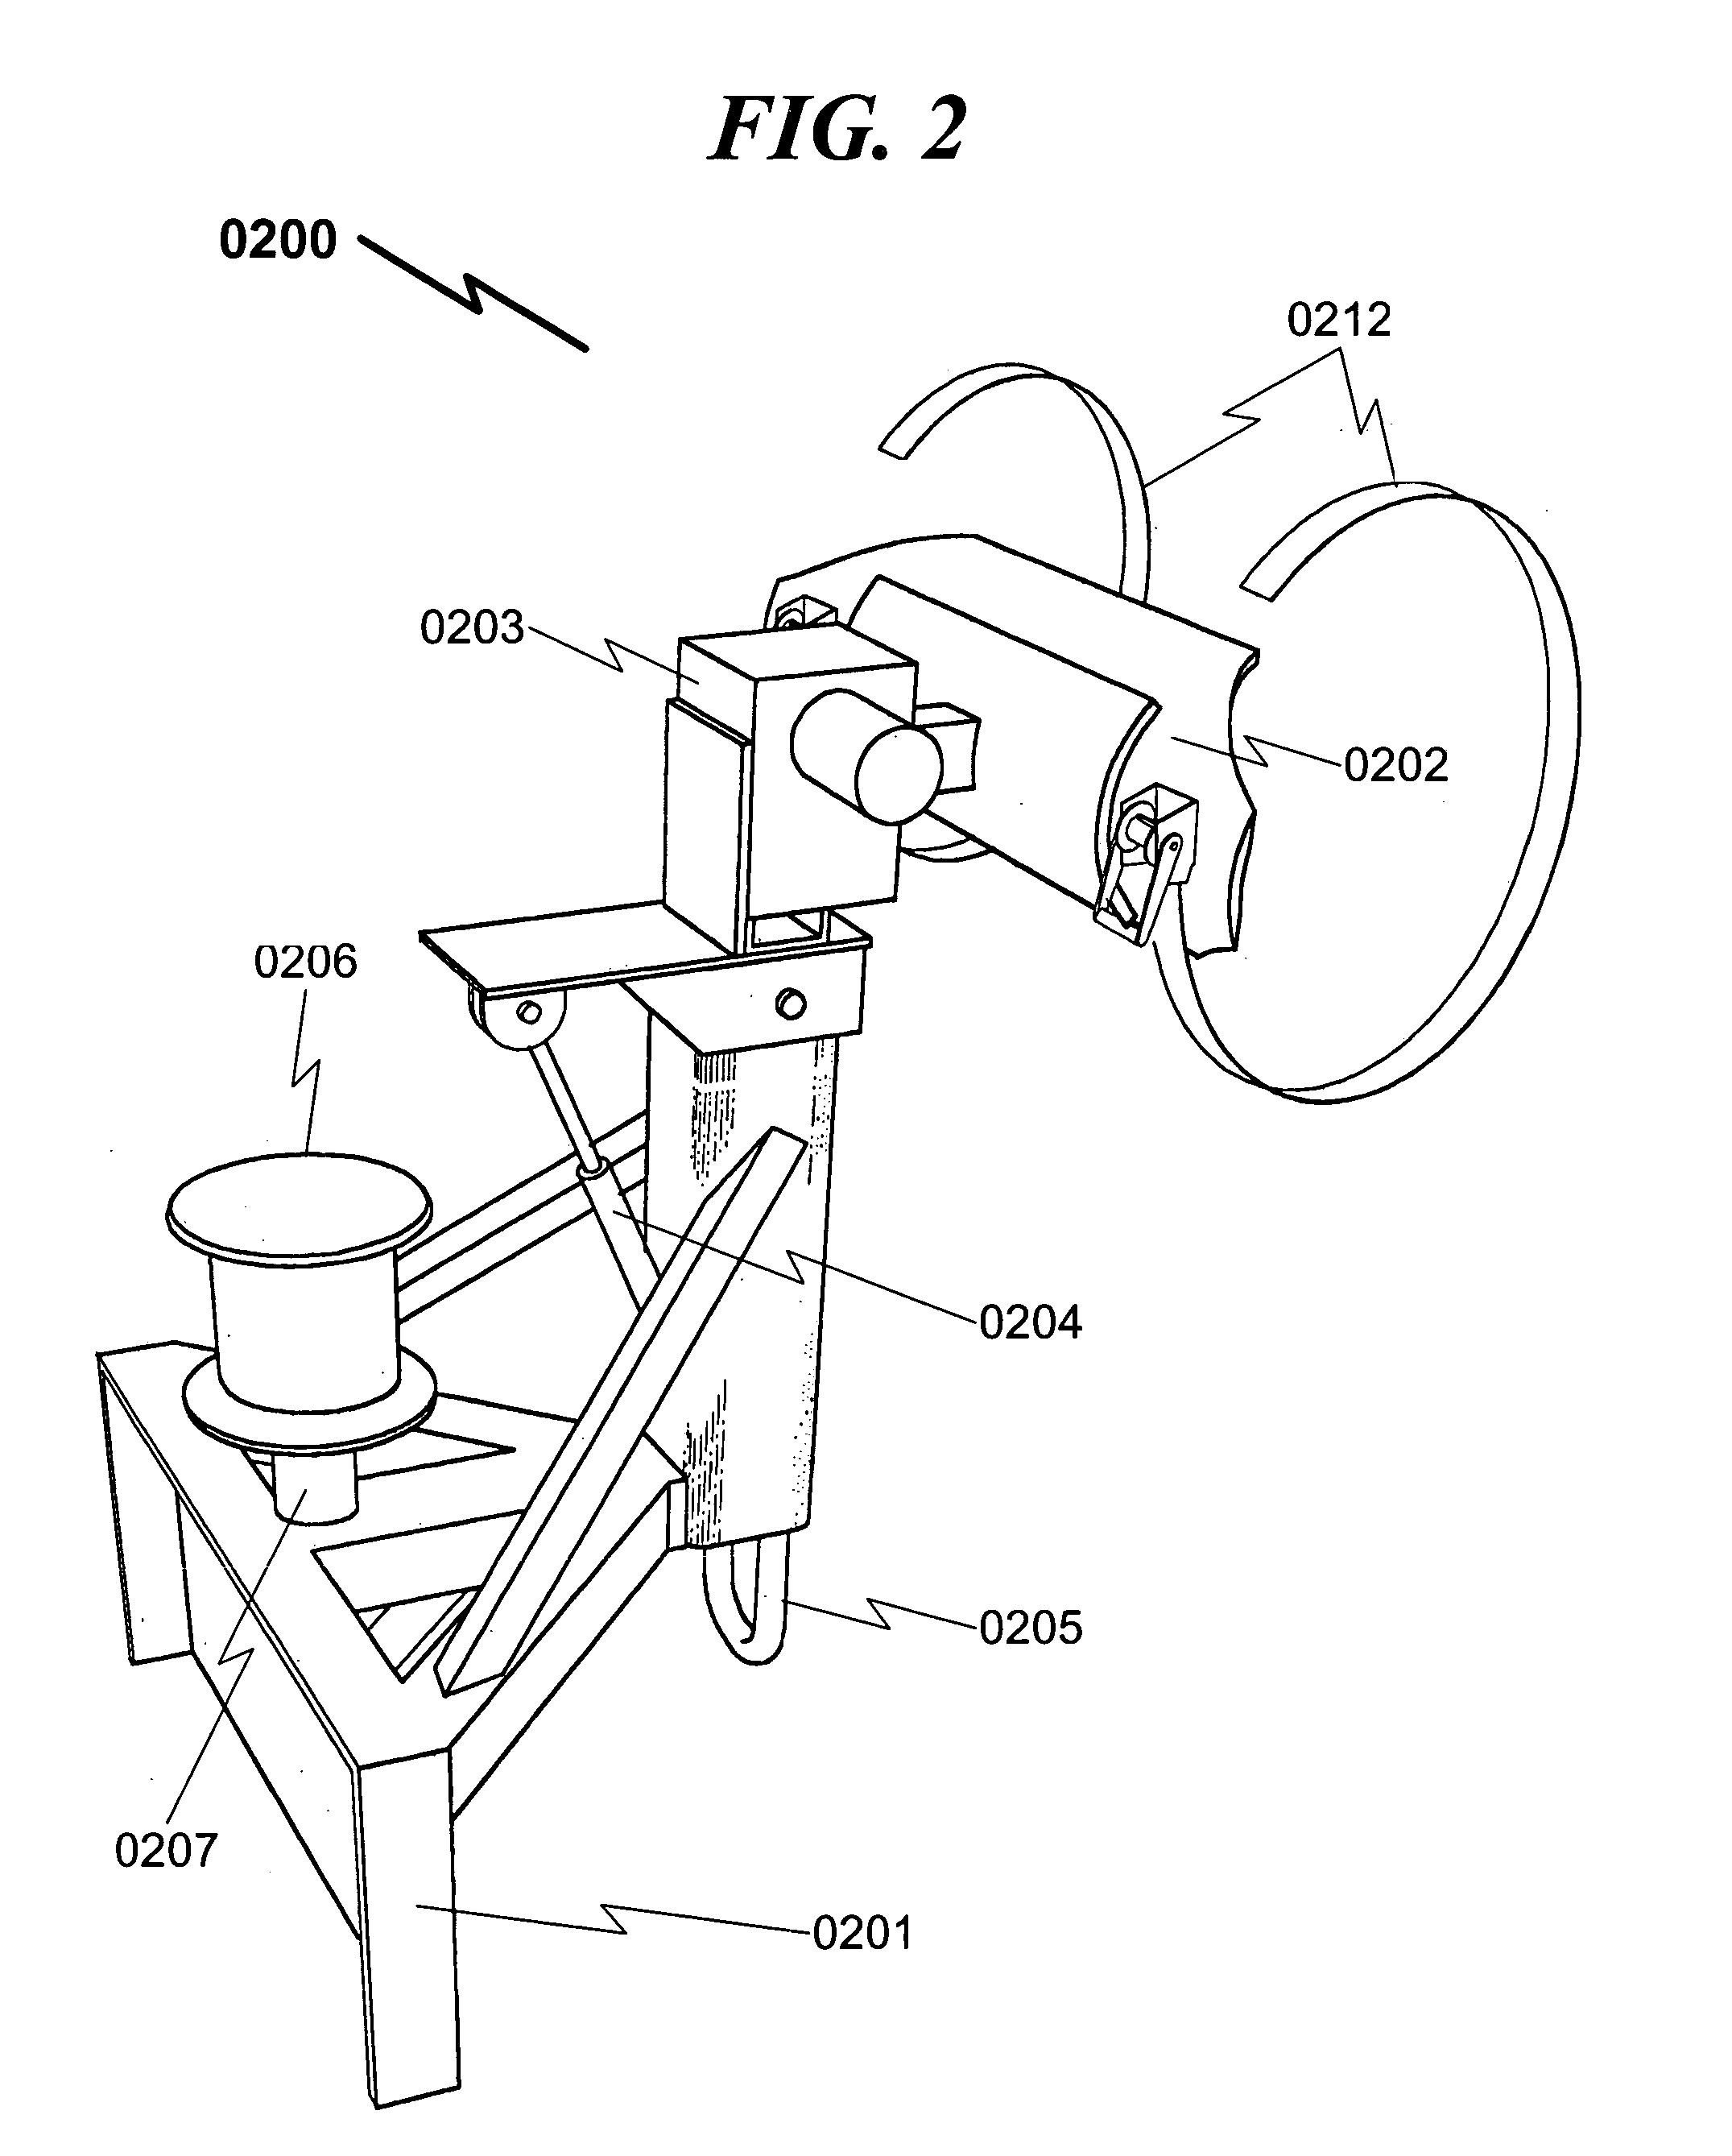 Utility pole installation system and method